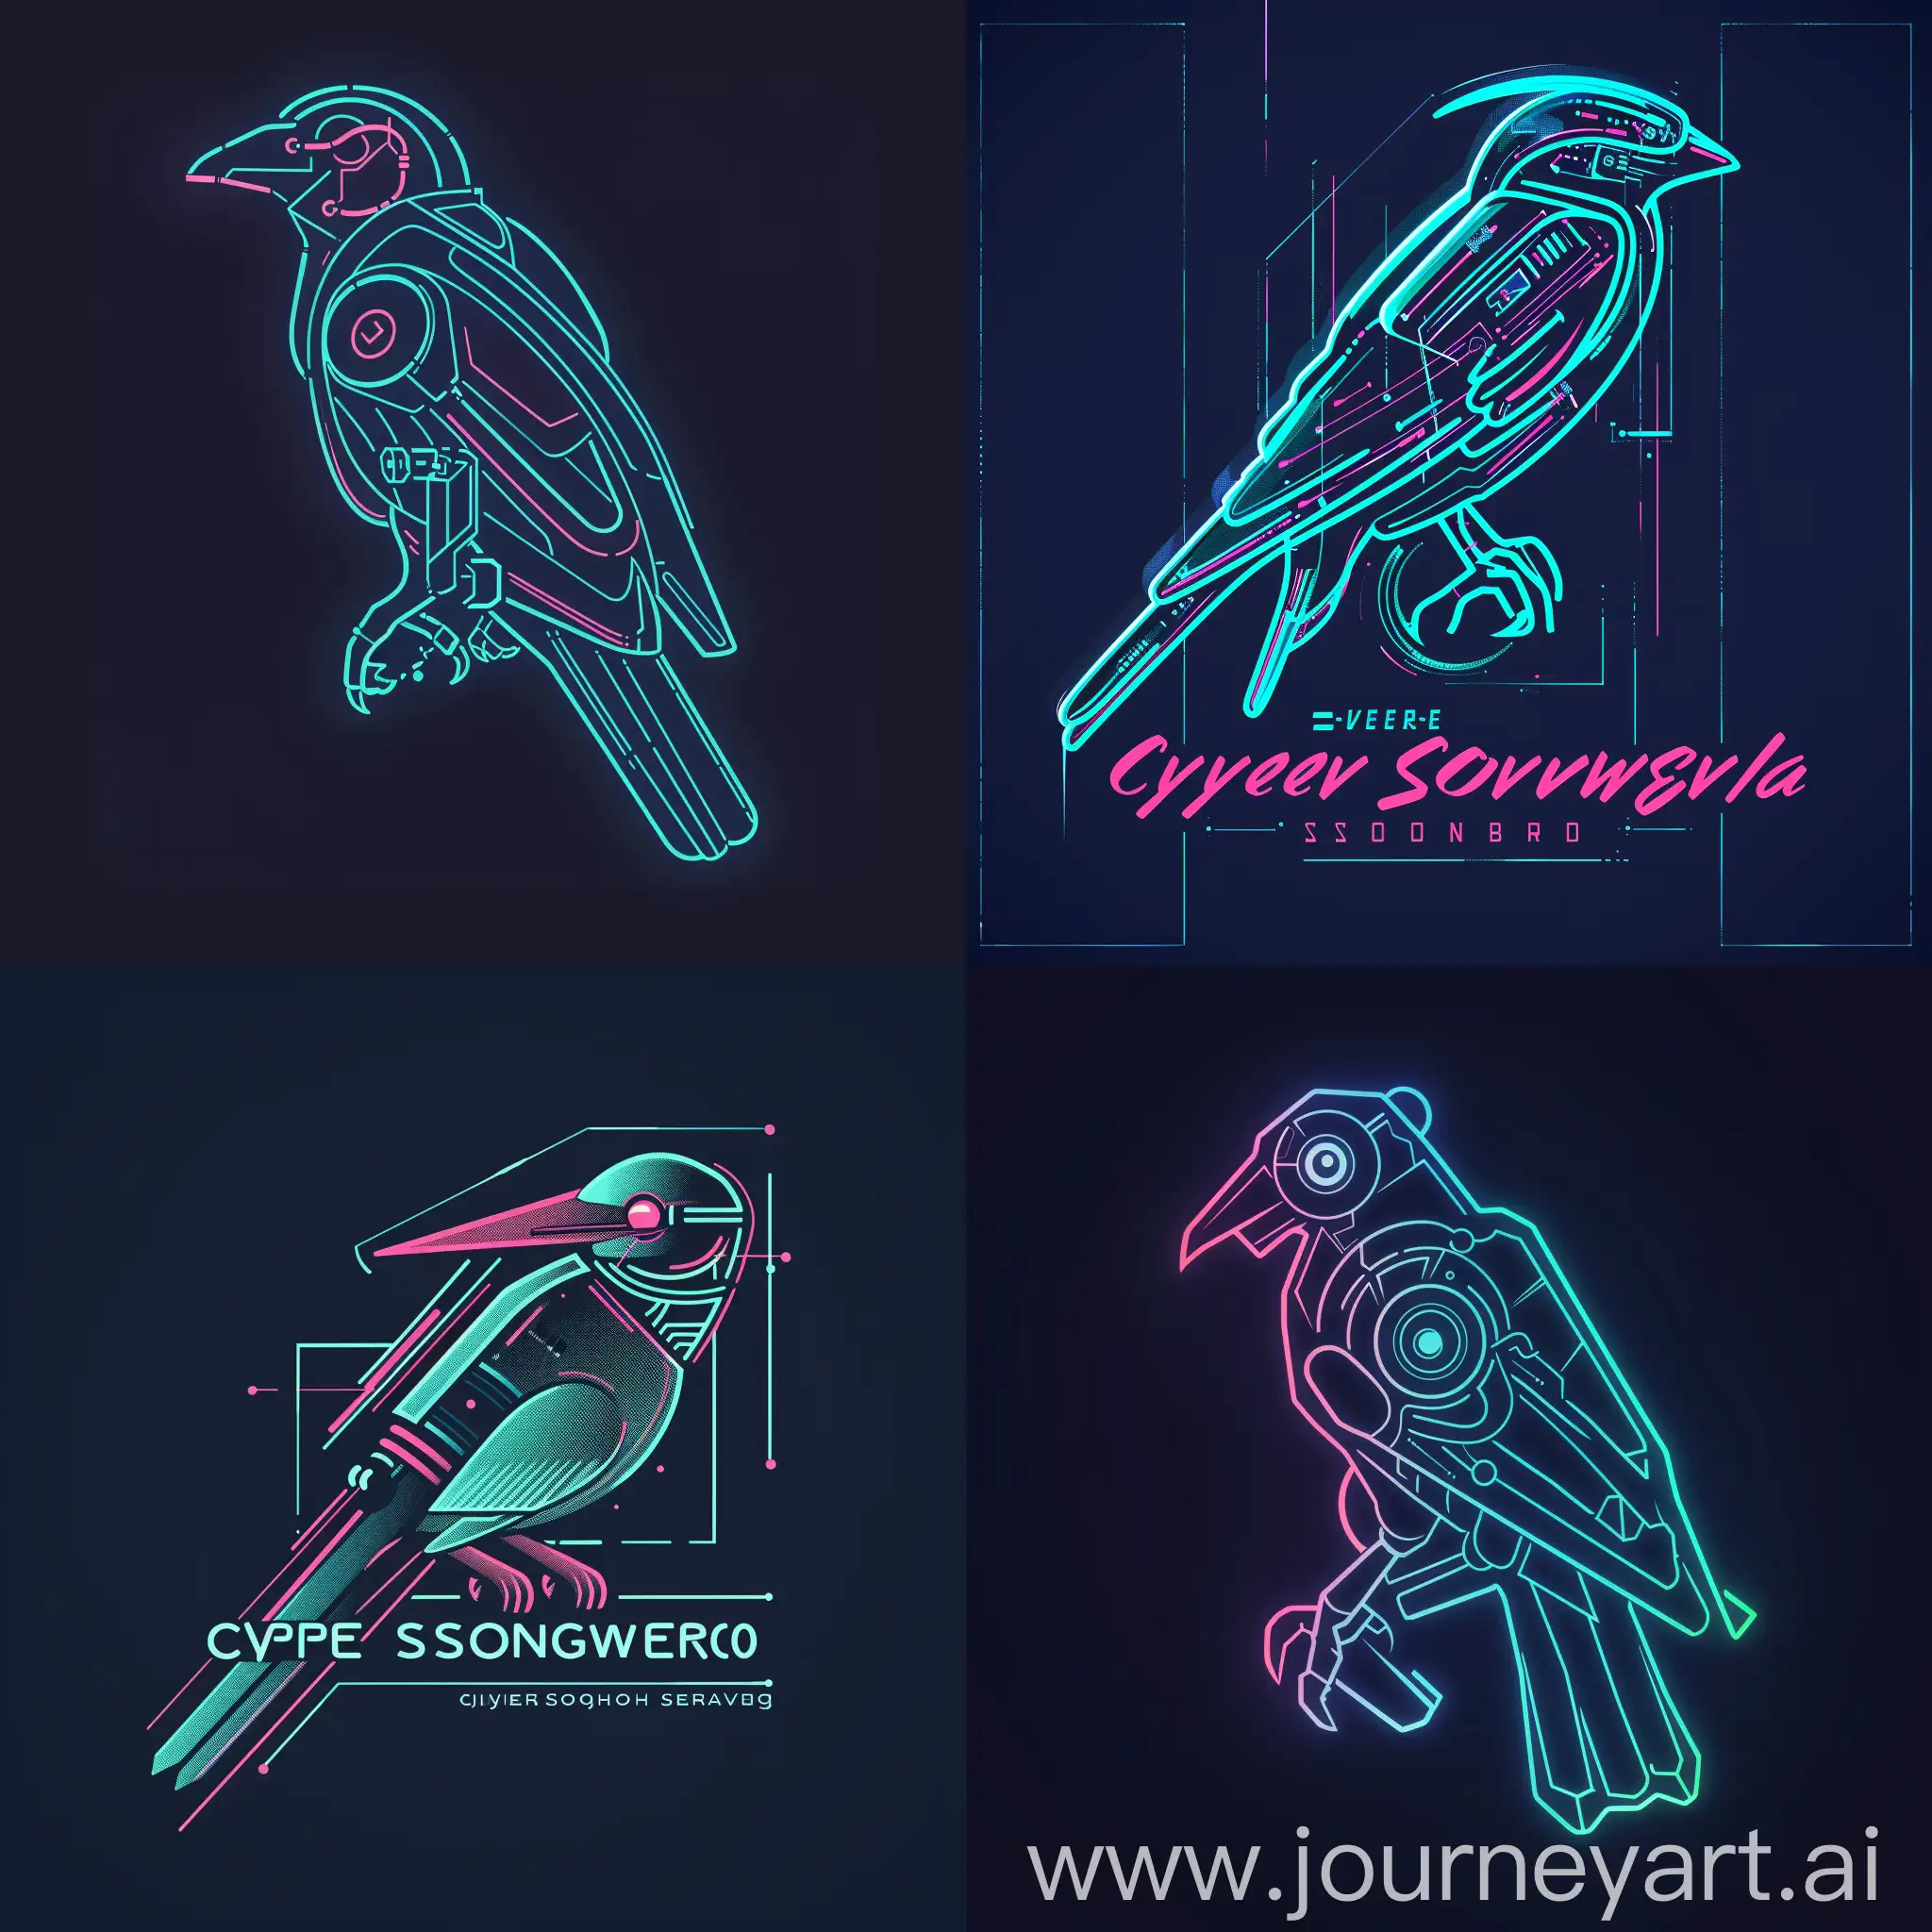 Create a minimalistic logo for a company named 'Cyber Songbird' that specializes in assembling and selling PCs. The theme should be cyberpunk and technology. The design should incorporate neon elements and have a futuristic, high-tech feel. The logo should include a stylized, sleek songbird, possibly with mechanical or robotic features, to reflect the company's name. Use clean lines and a modern aesthetic, with a focus on minimalism and neon colors like electric blue, neon pink, or bright green. The overall feel should be innovative, cutting-edge, and visually striking.  